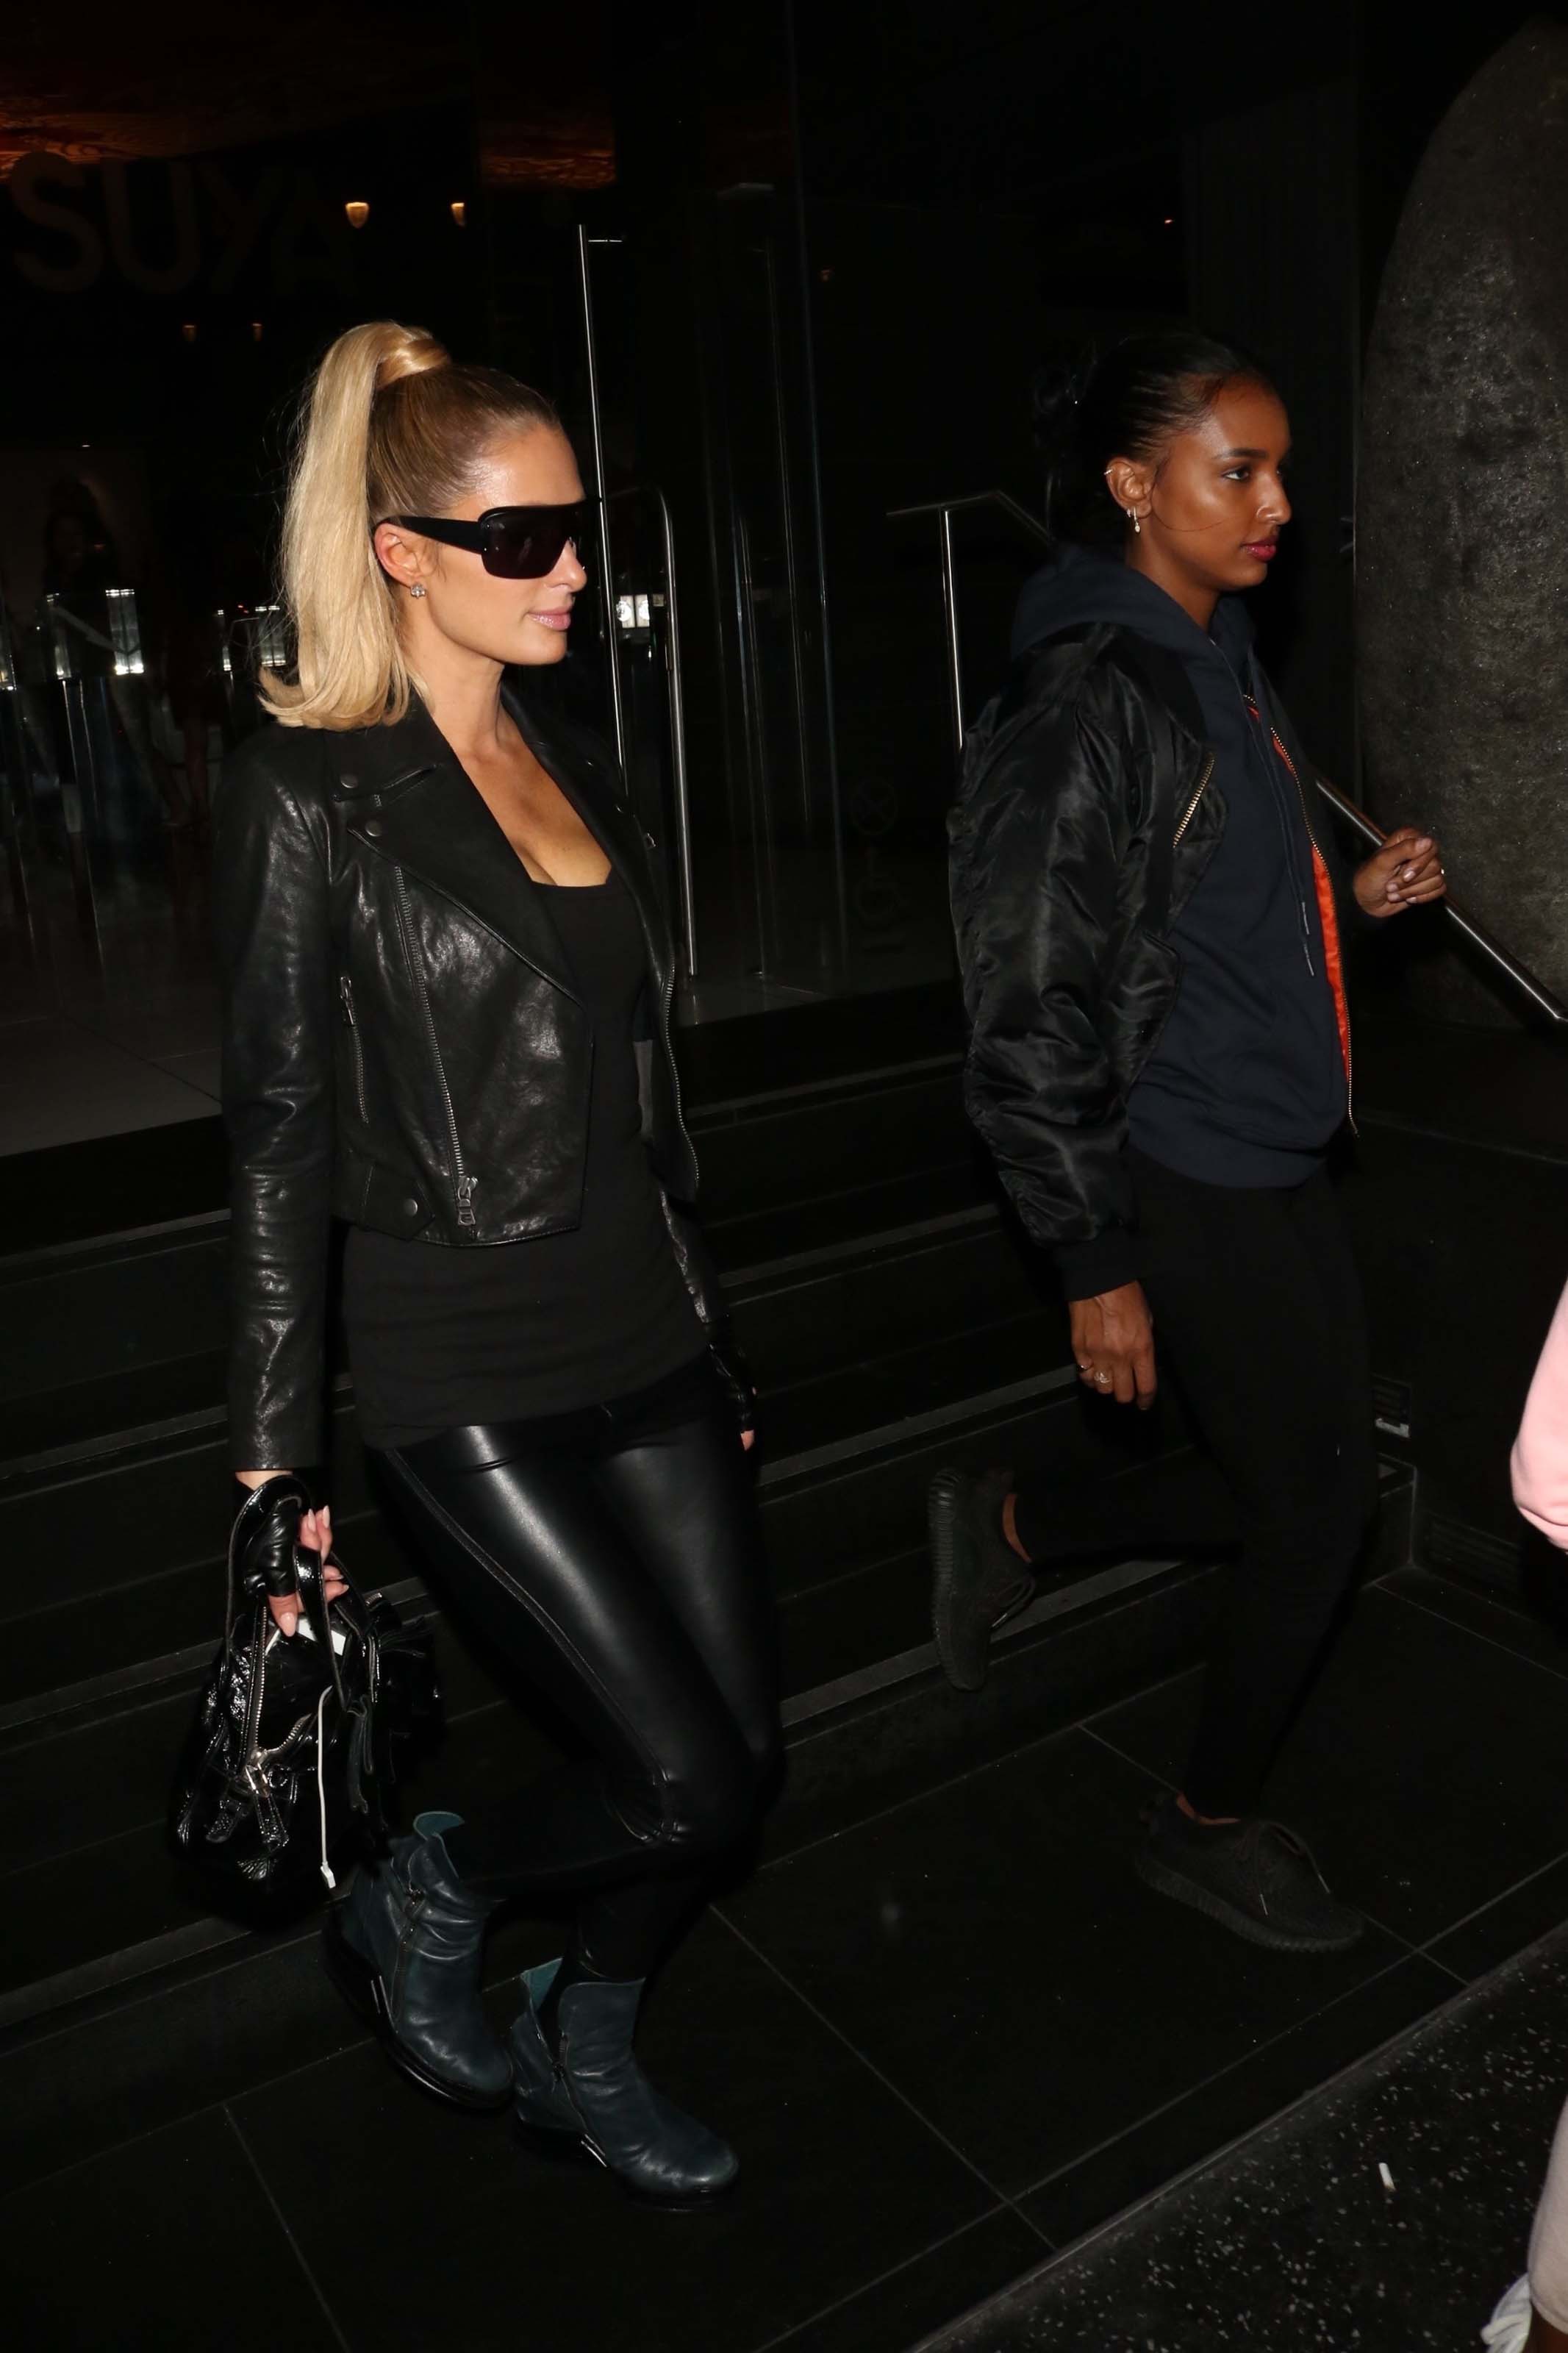 Paris Hilton steps out for a night of fun